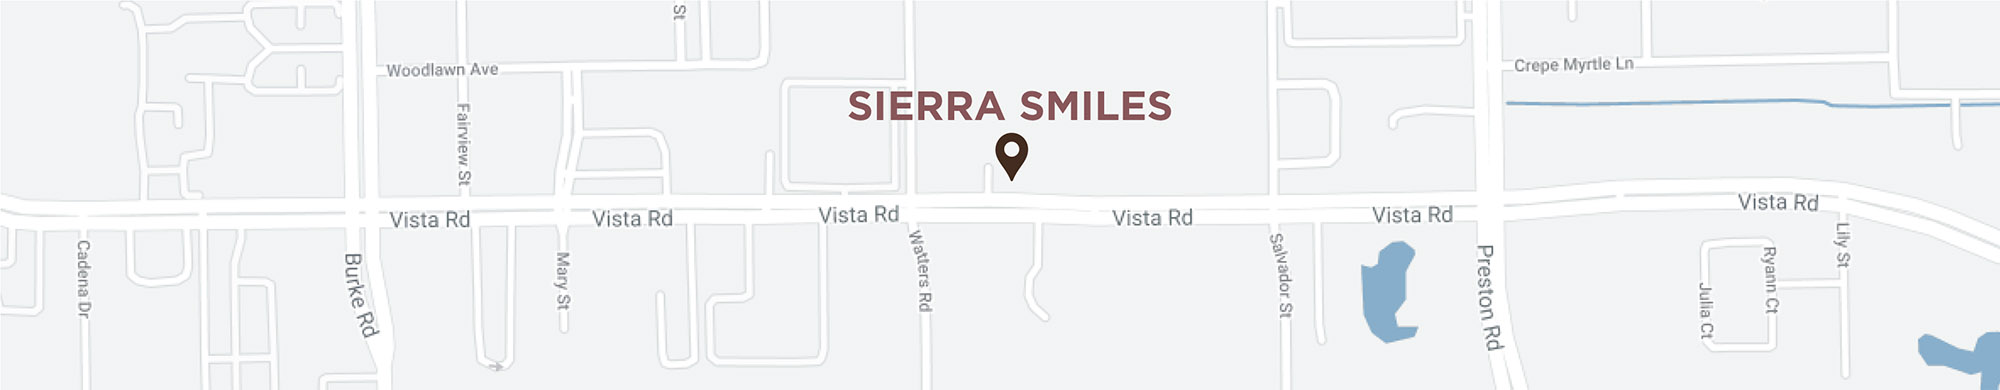 Directions to our Pasadena location with Sierra Smiles DDS